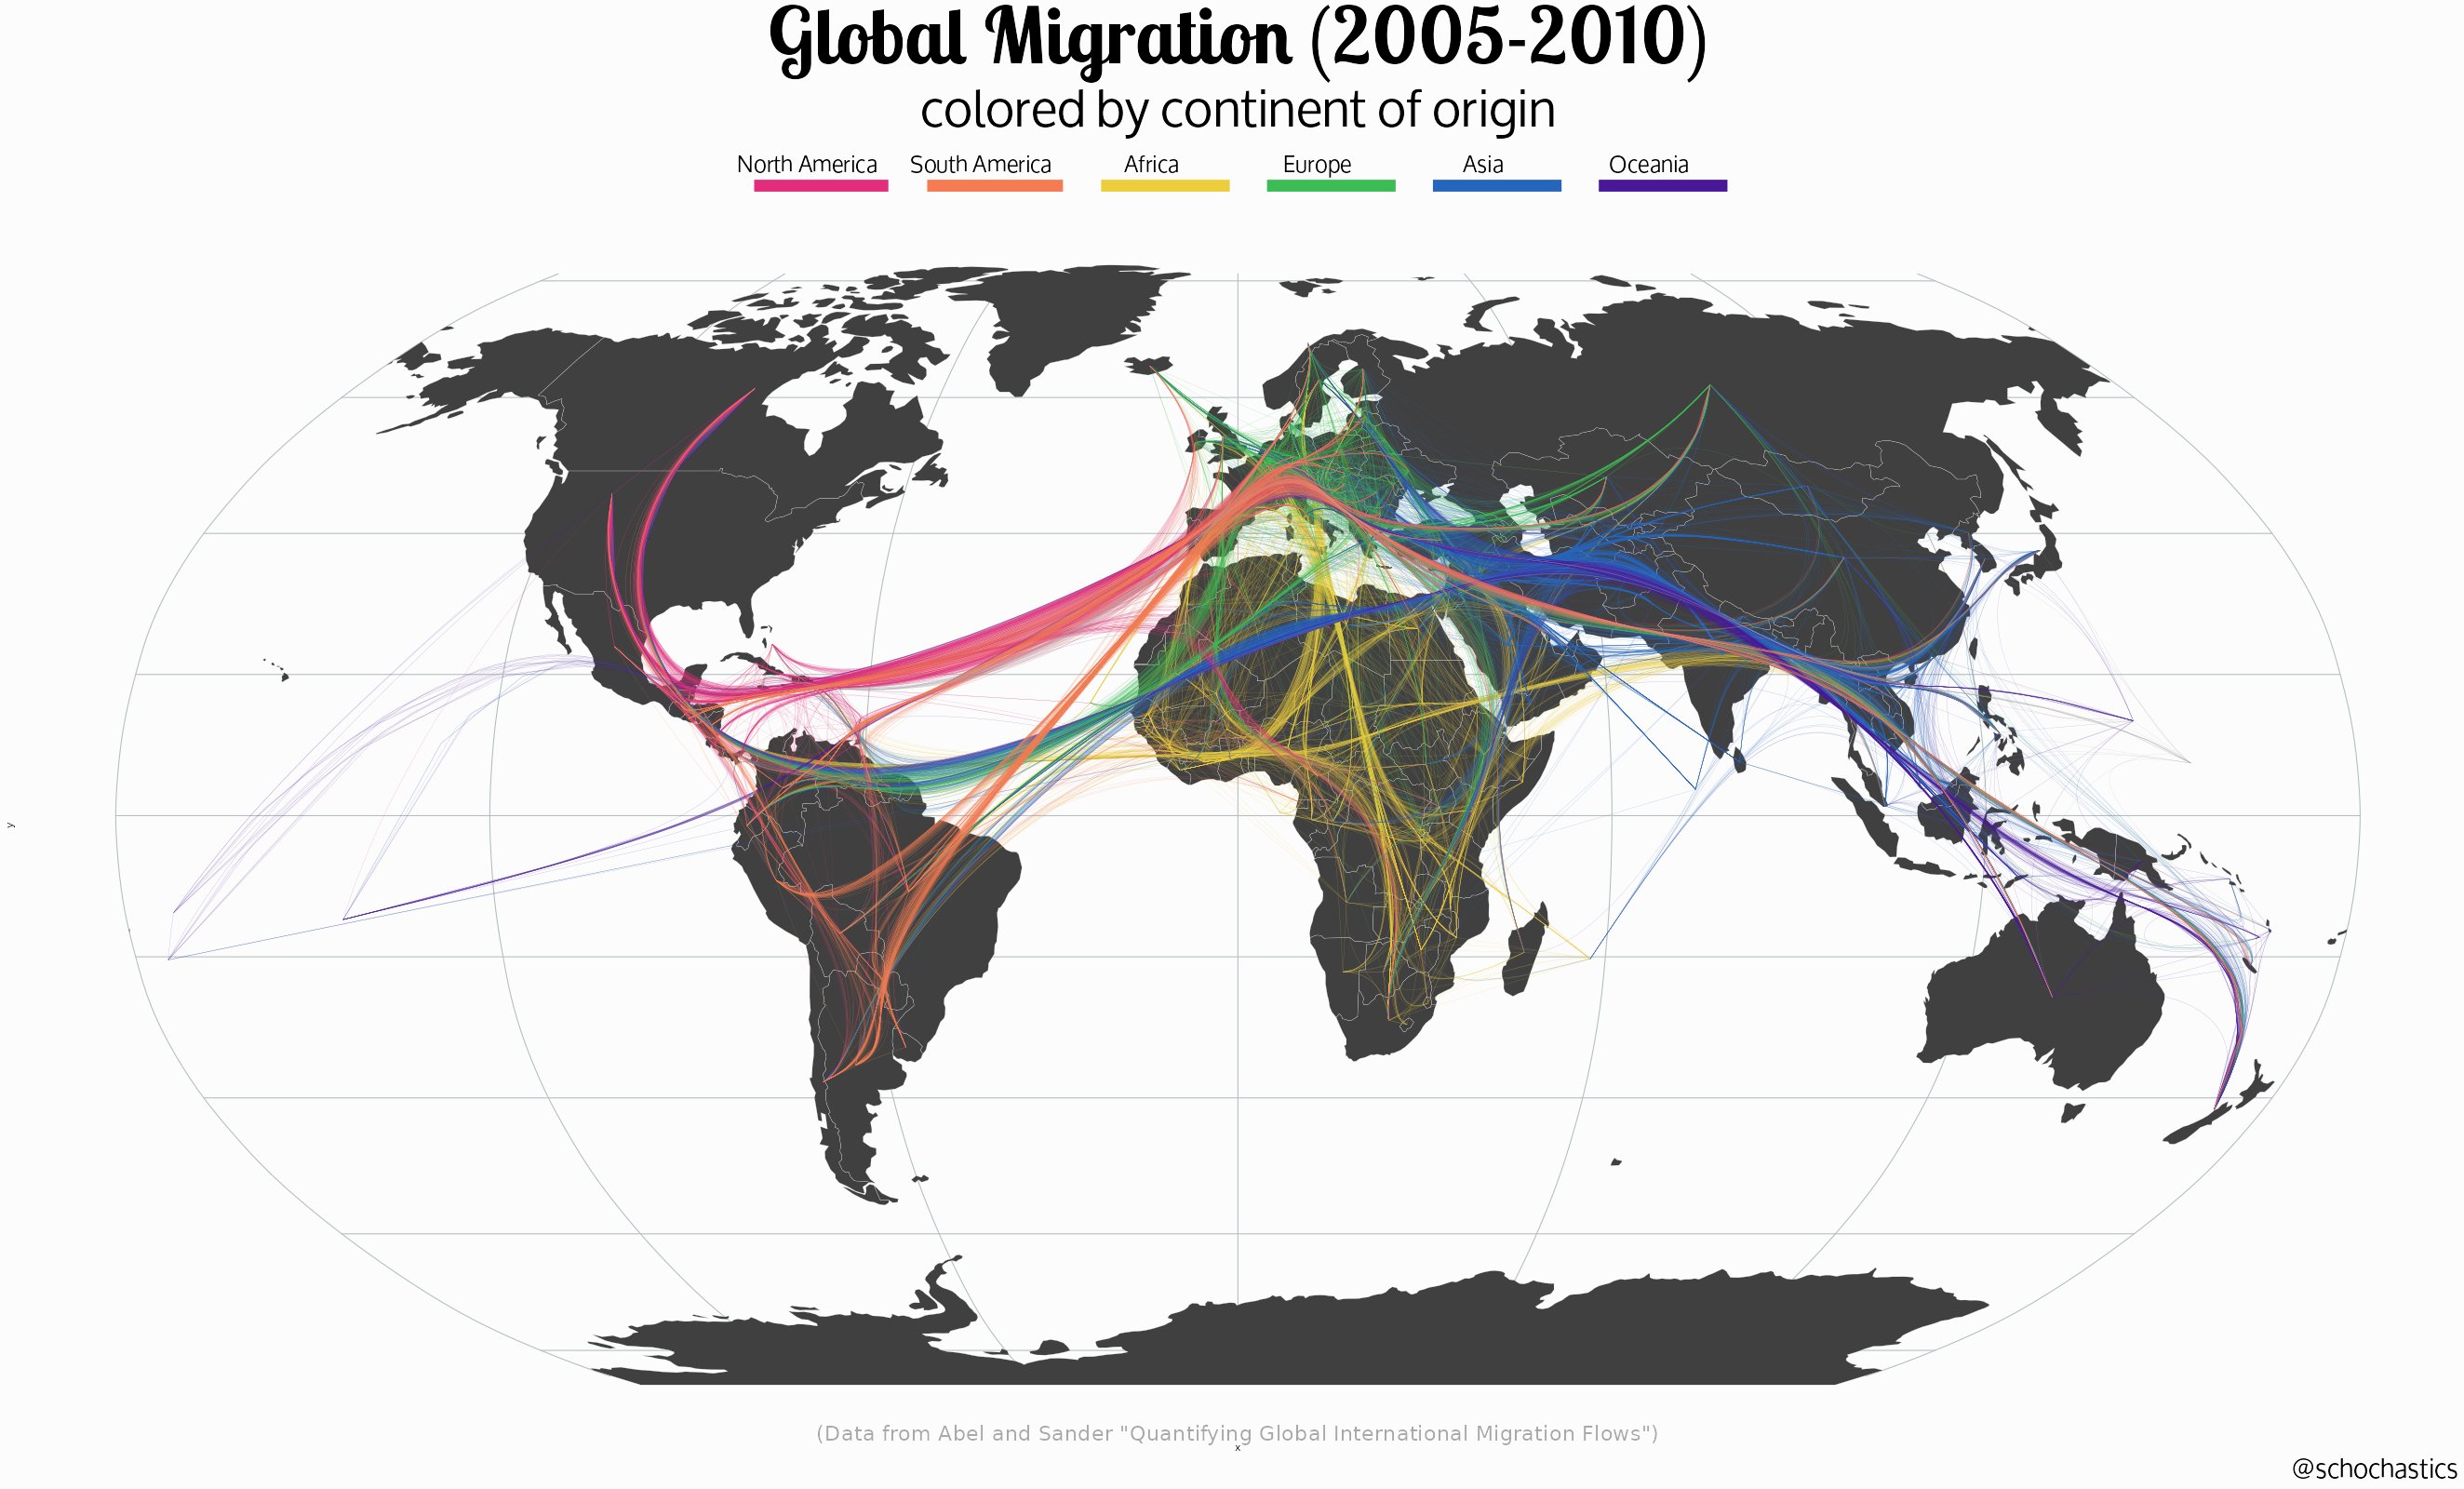 A world map showing bundles of coloured line flowing between the continents. The maps is titled 'Global Migration (2005-2010)' and the colours represent the continent of origin